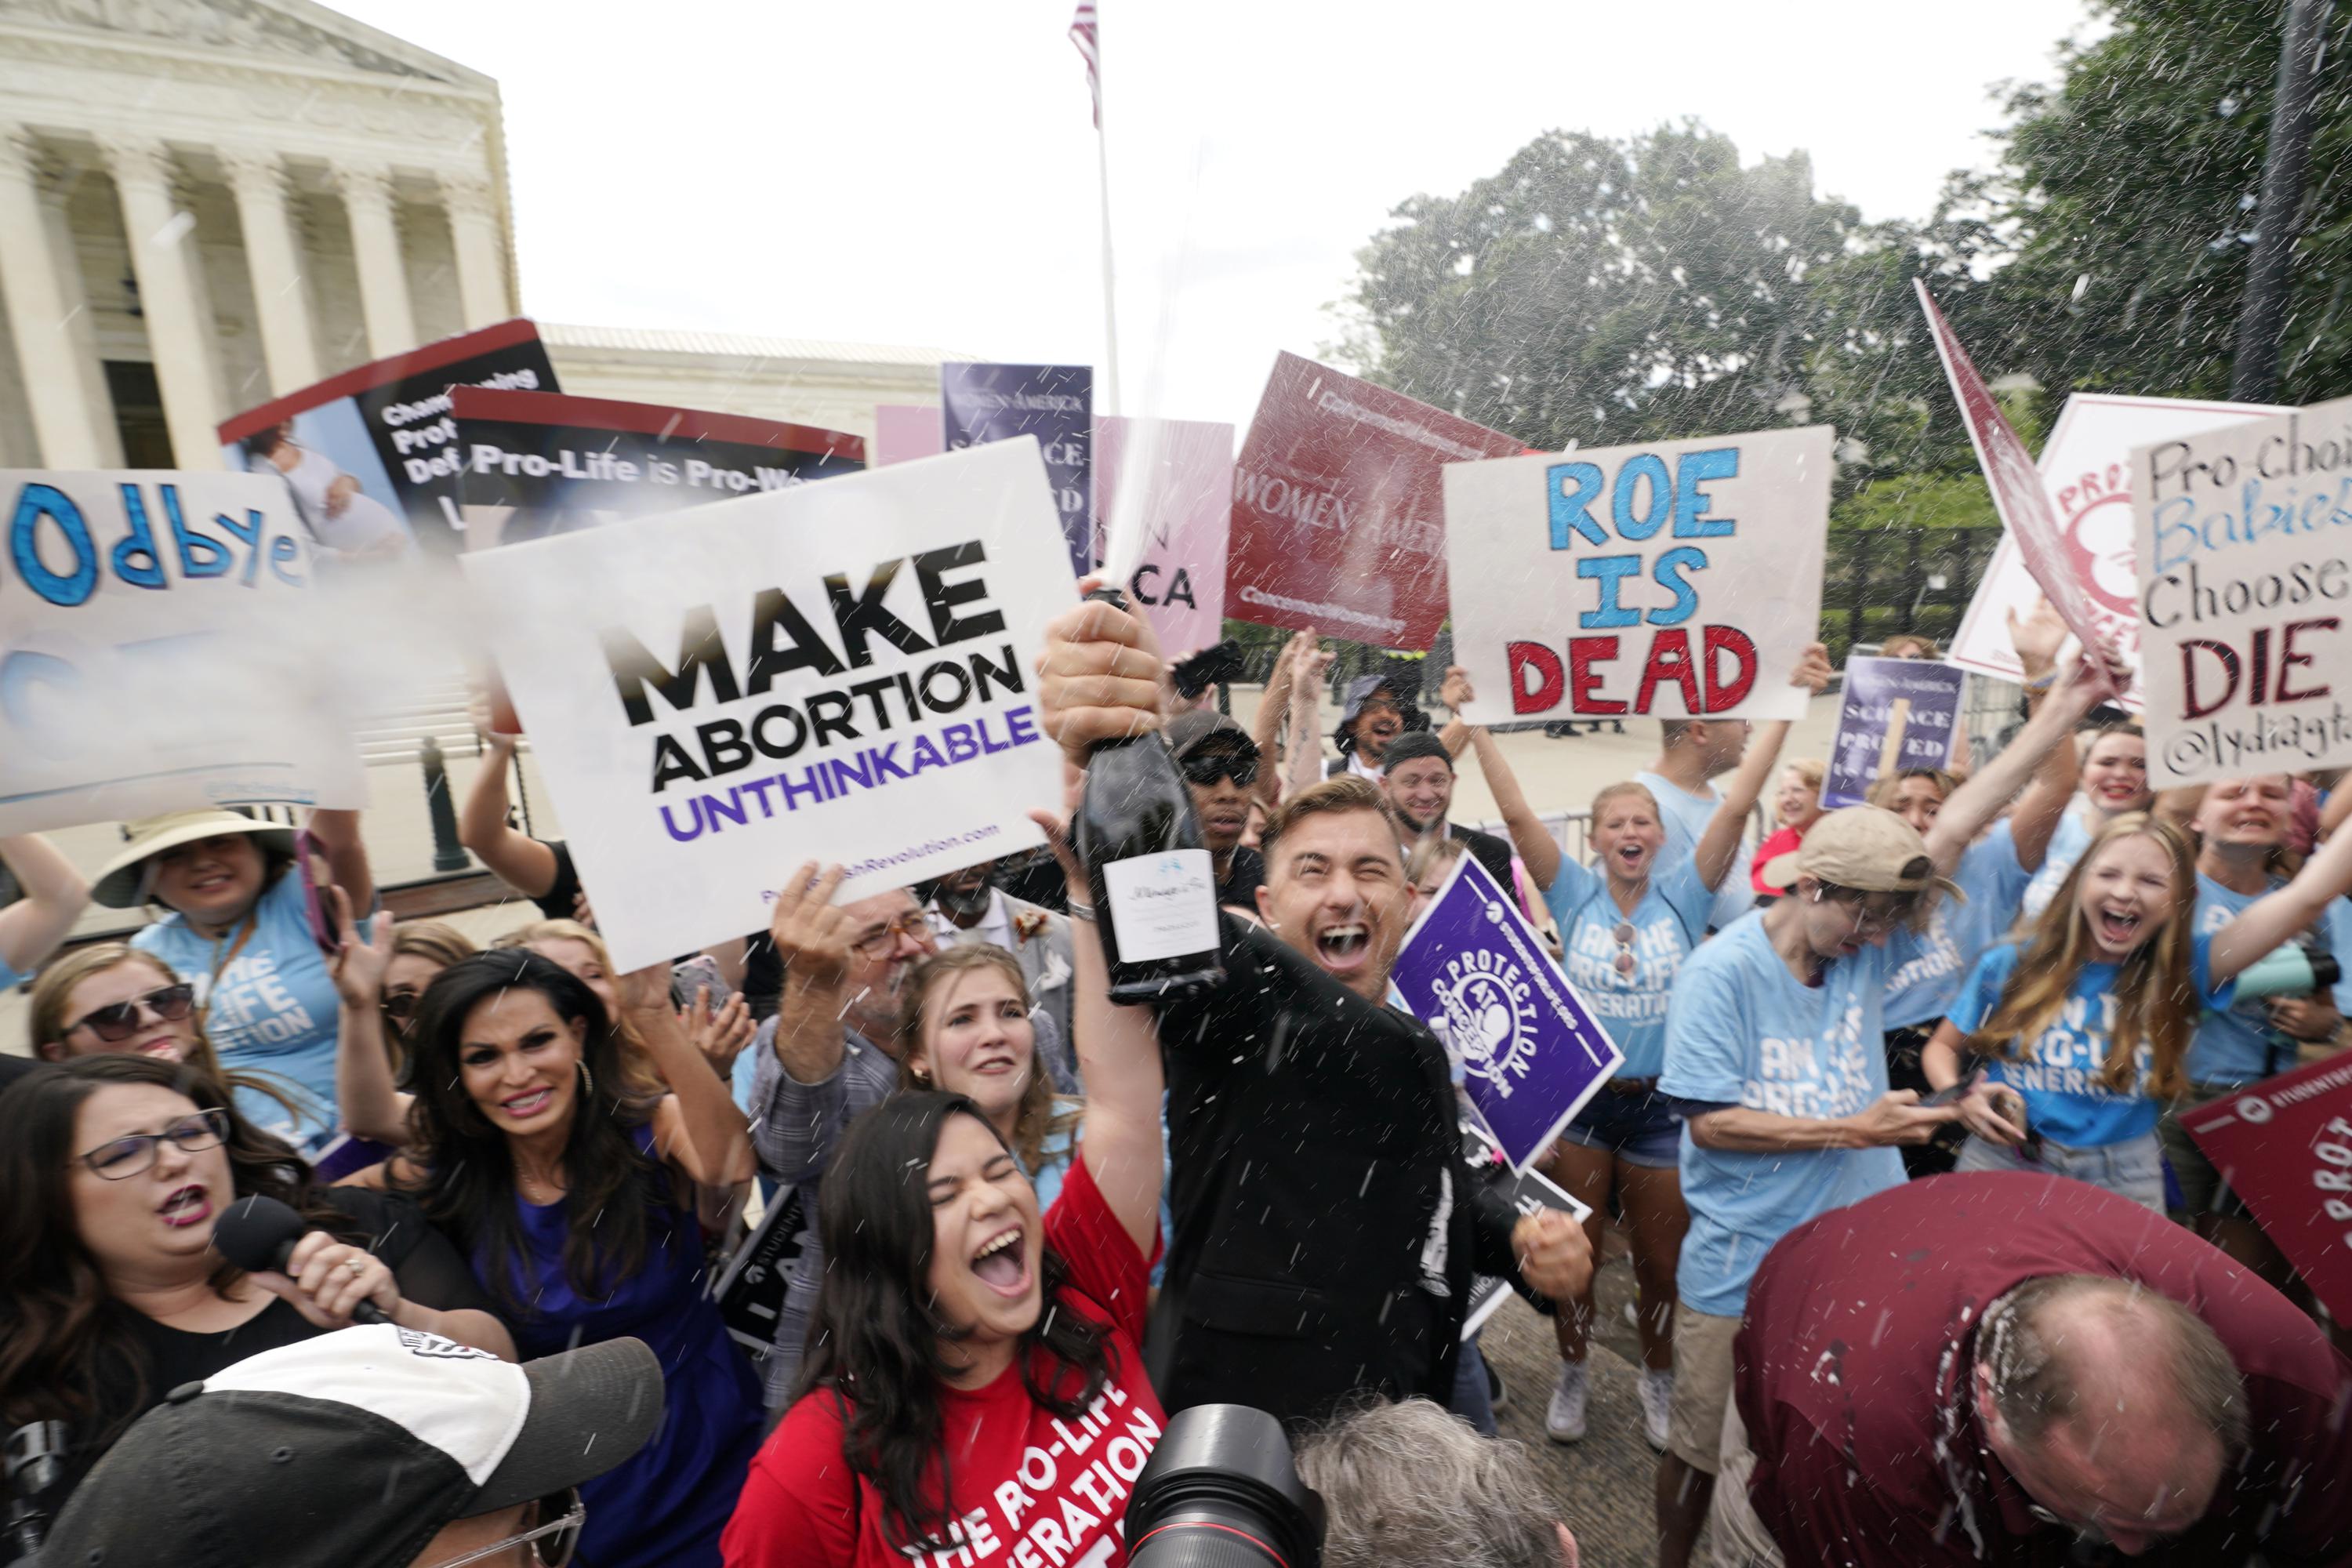 Is abortion illegal in the U.S. now? Depends where you live